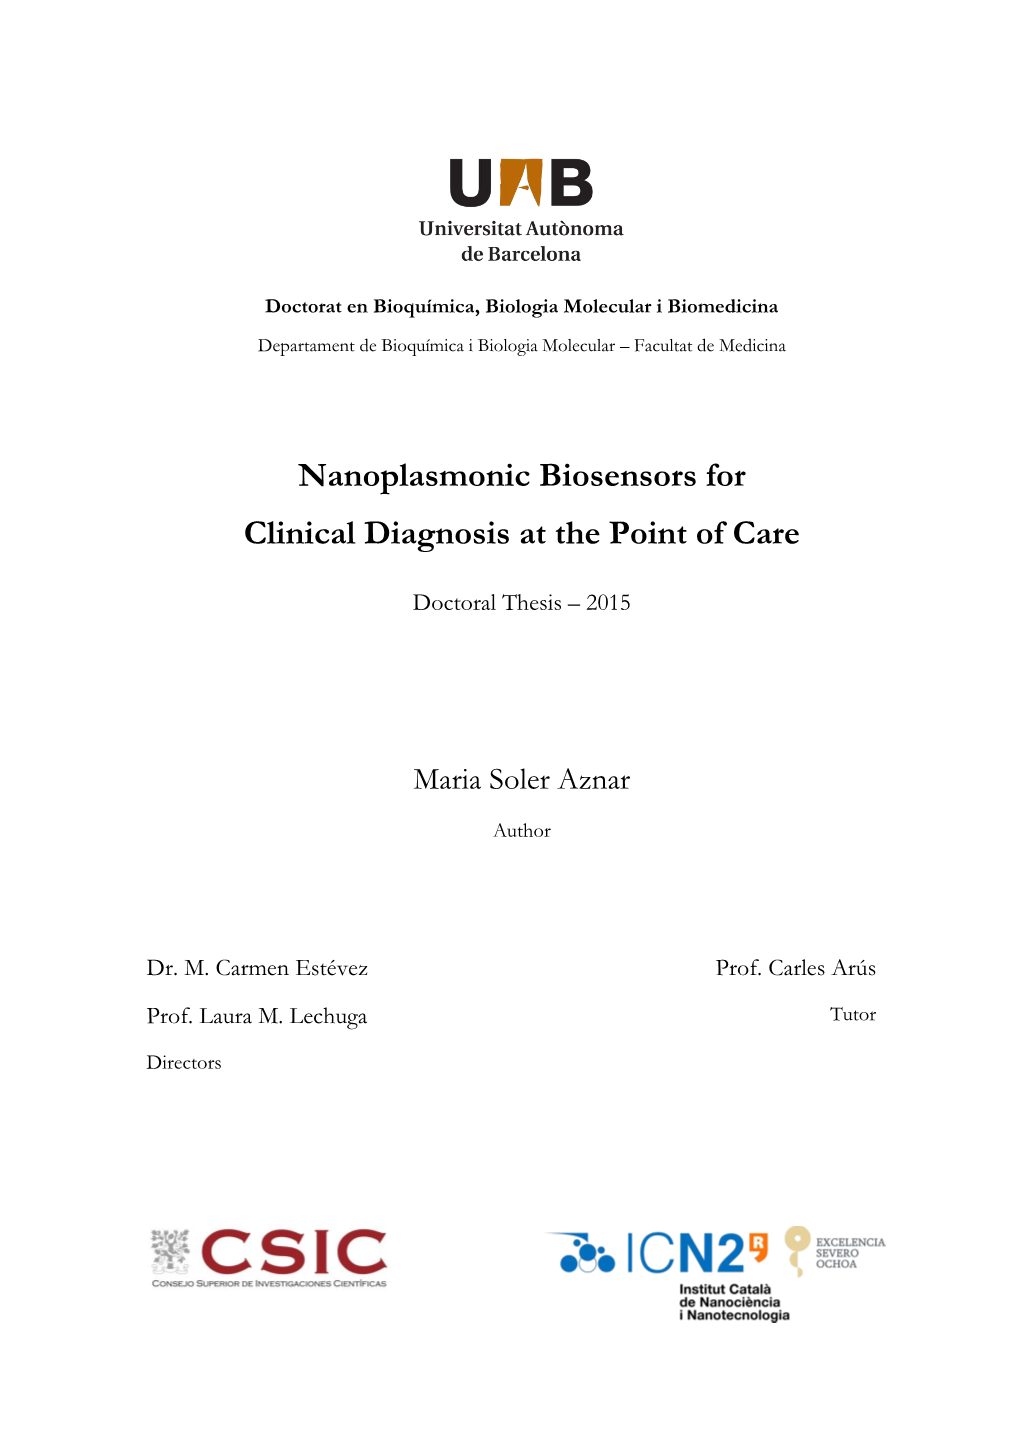 Nanoplasmonic Biosensors for Clinical Diagnosis at the Point of Care